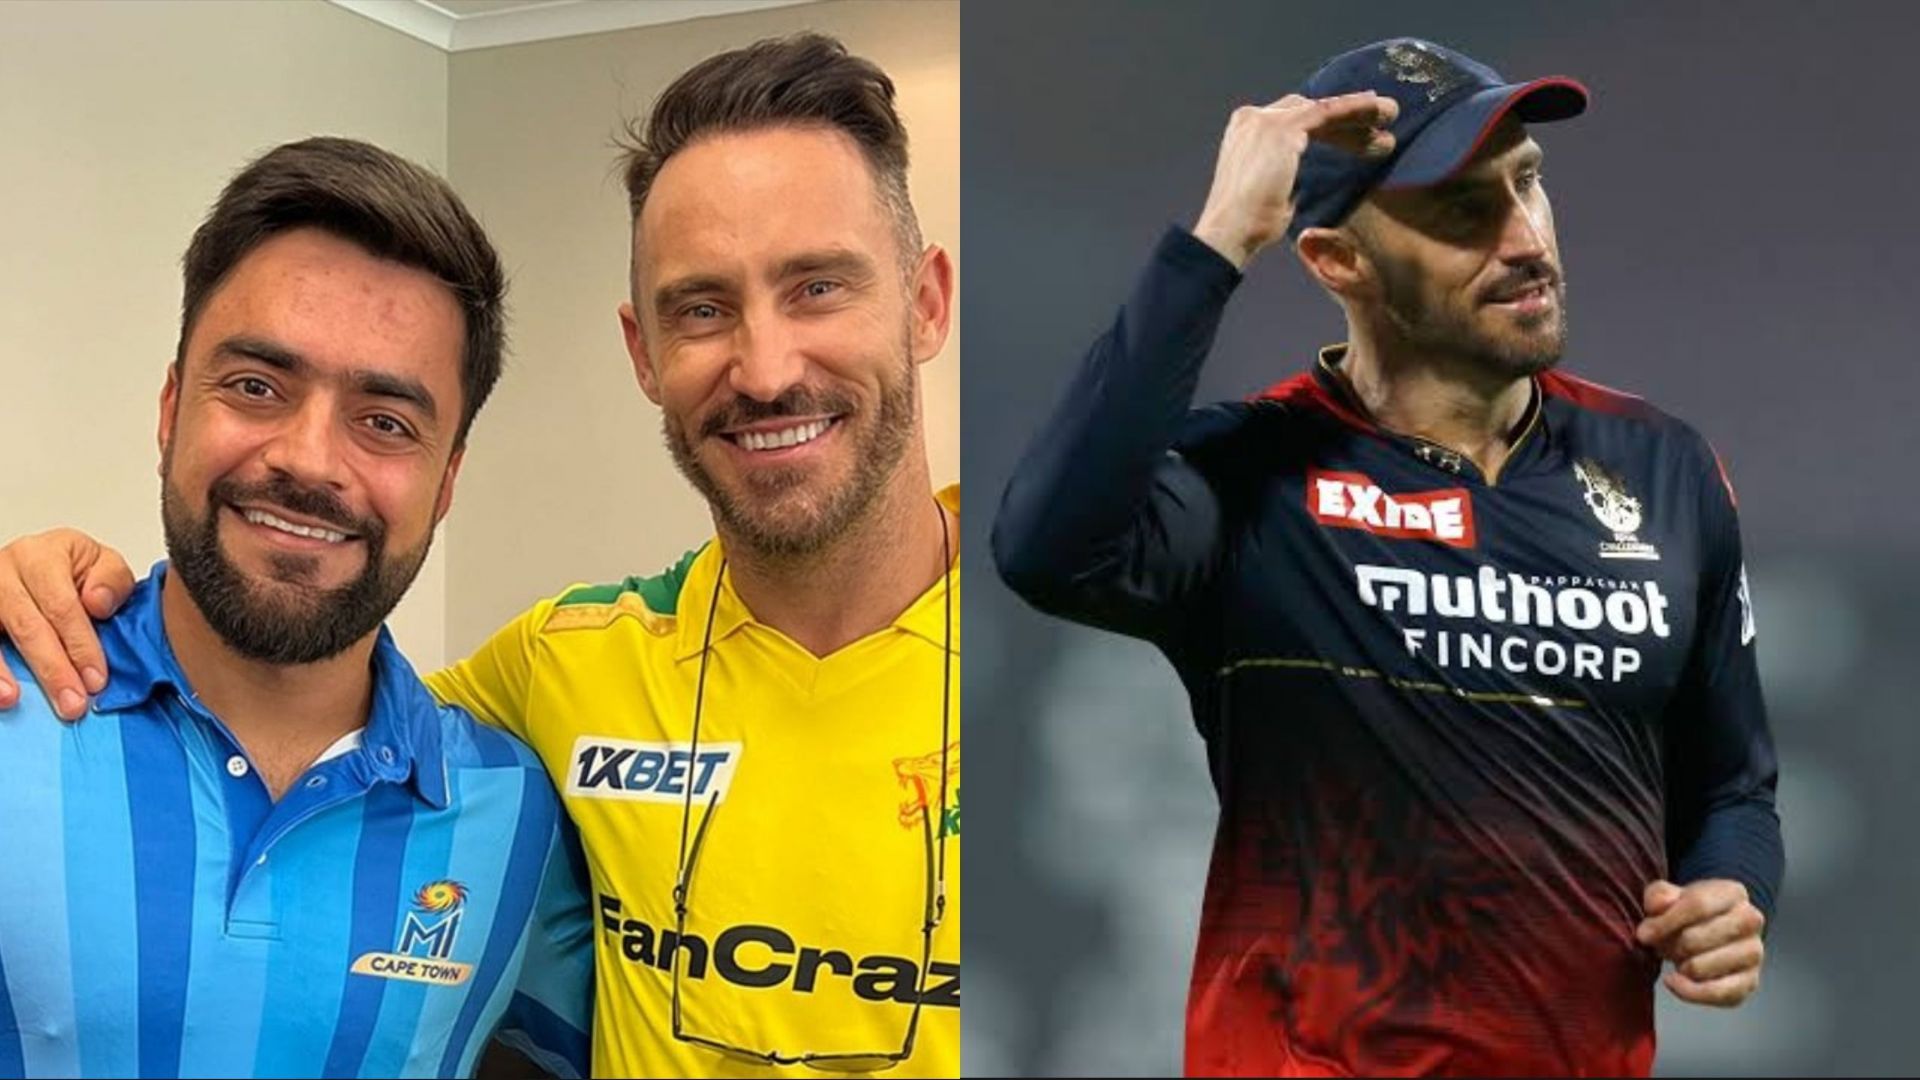 Faf du Plessis will aim to return to form before IPL 2023 